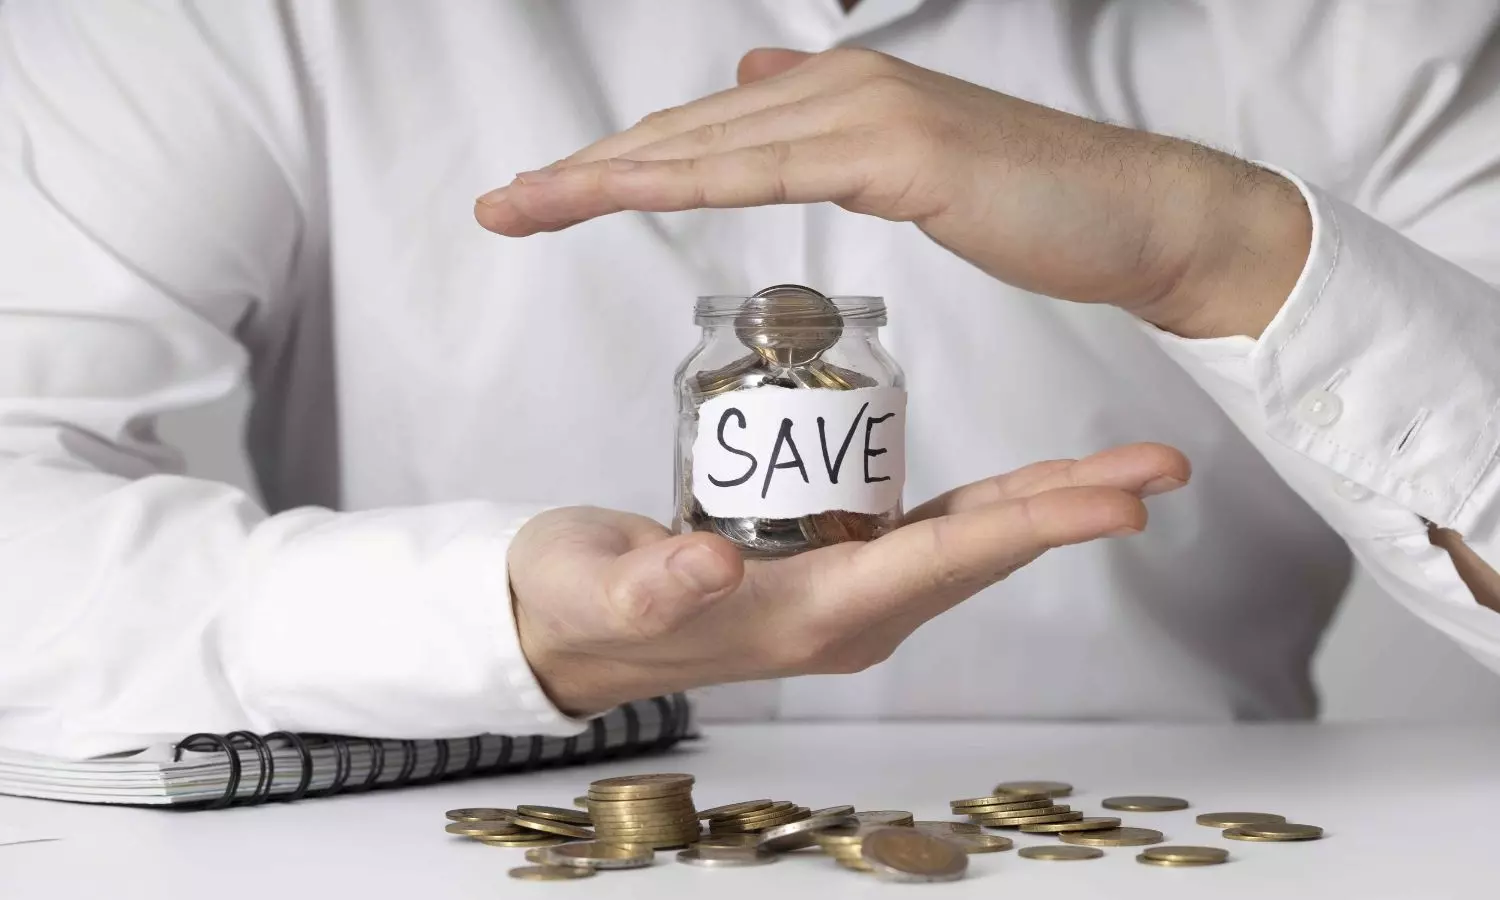 How To Save 30 Percent Of Monthly Salary Is Easy To Follow